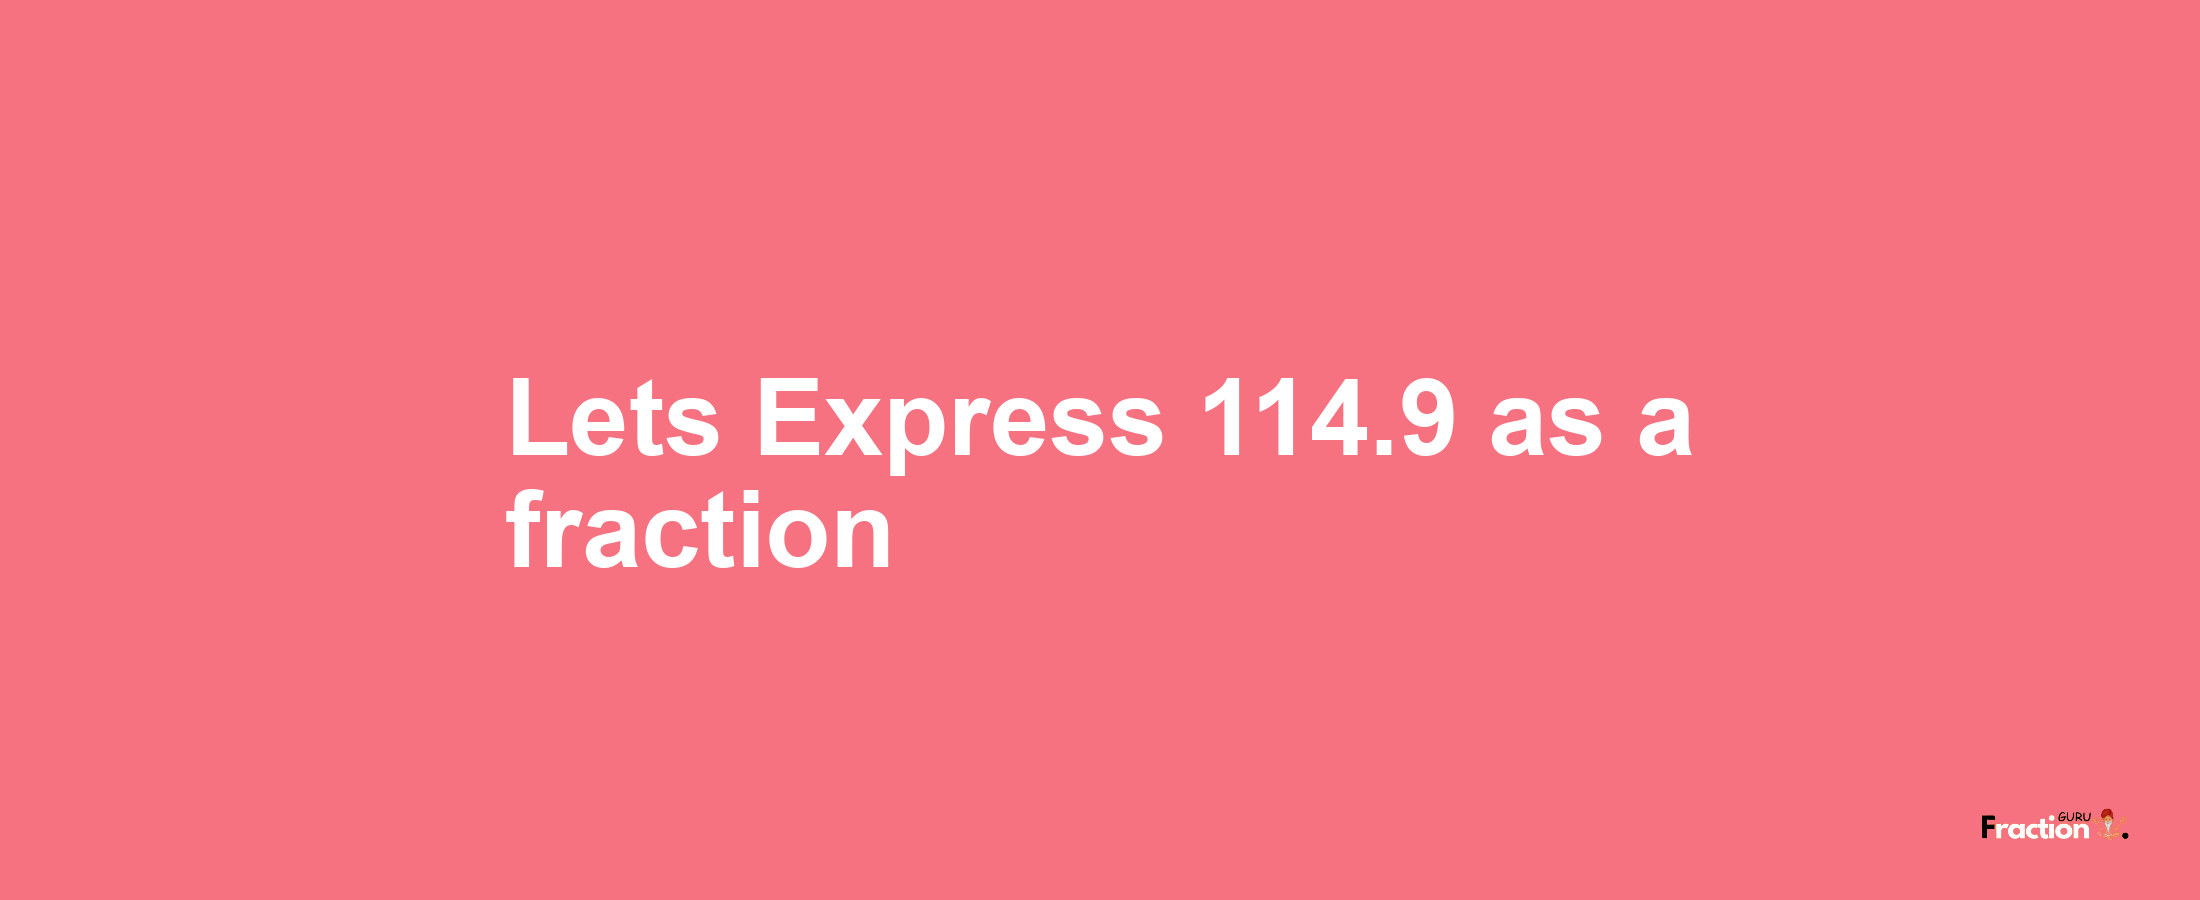 Lets Express 114.9 as afraction